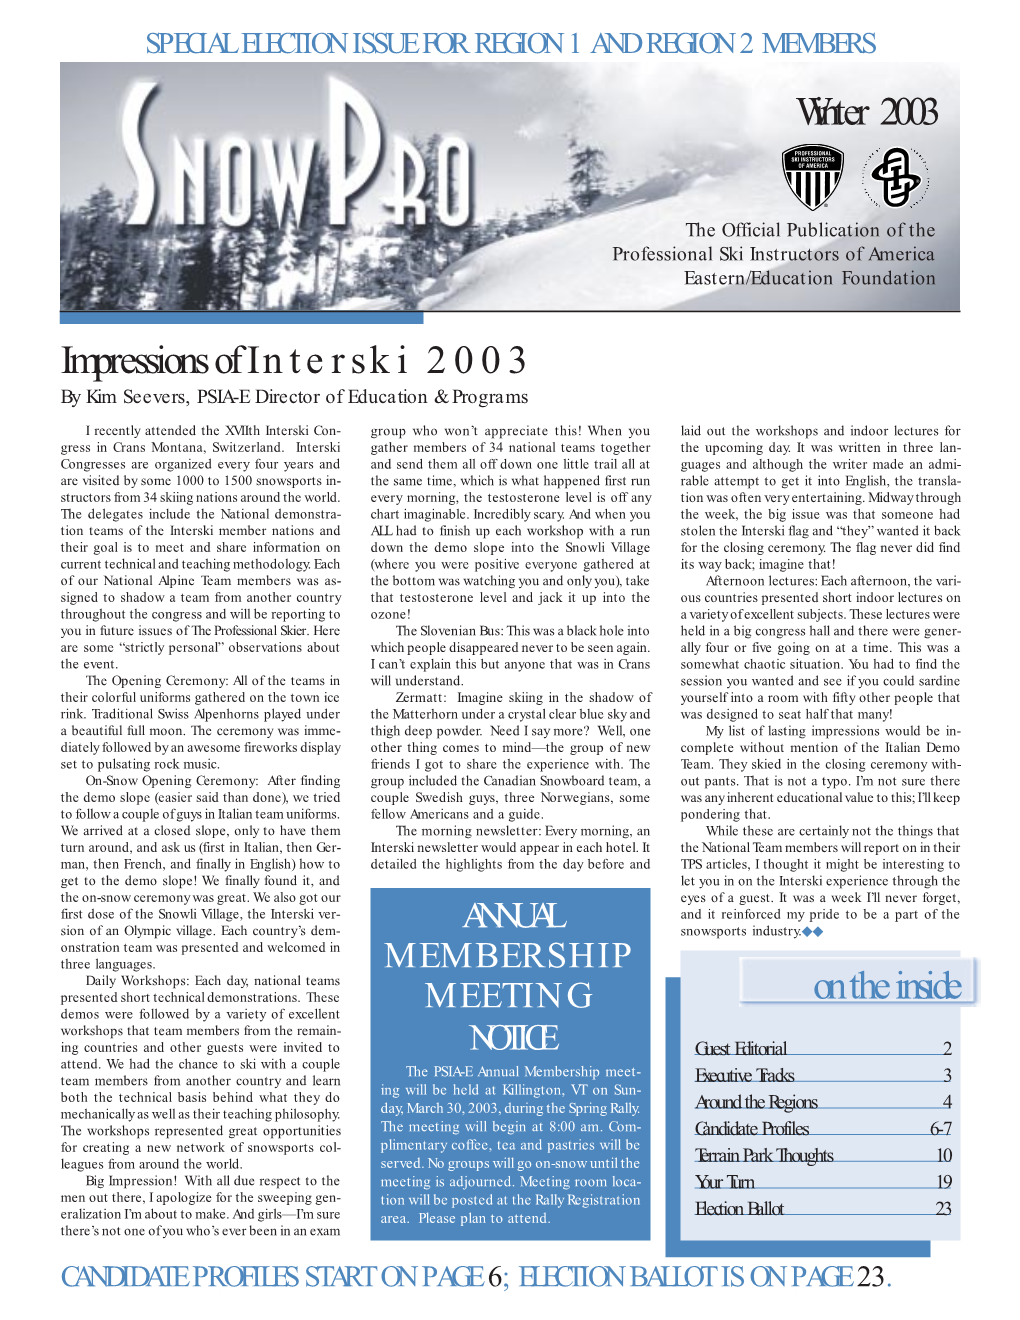 Winter 2003 on the Inside Impressions of Interski 2003